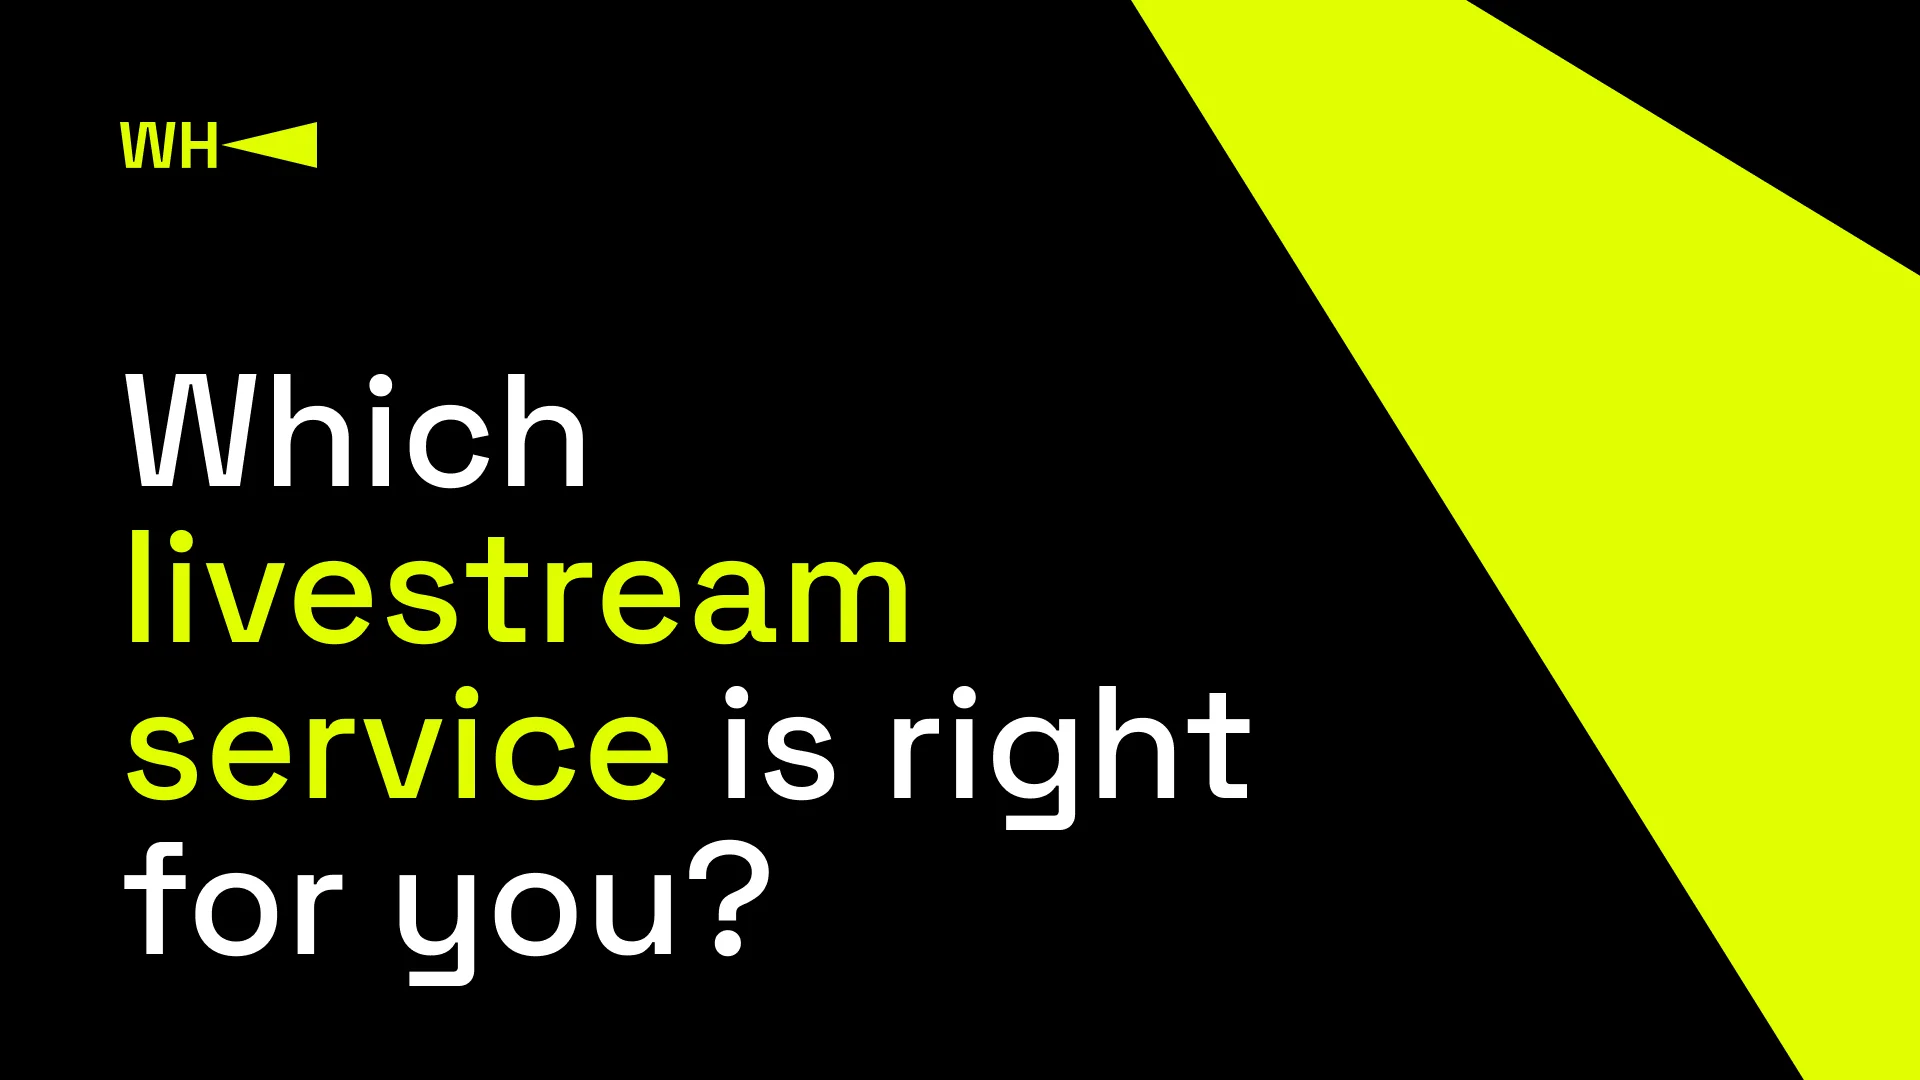 Which livestream service is right for you? Credit: WePlay Holding